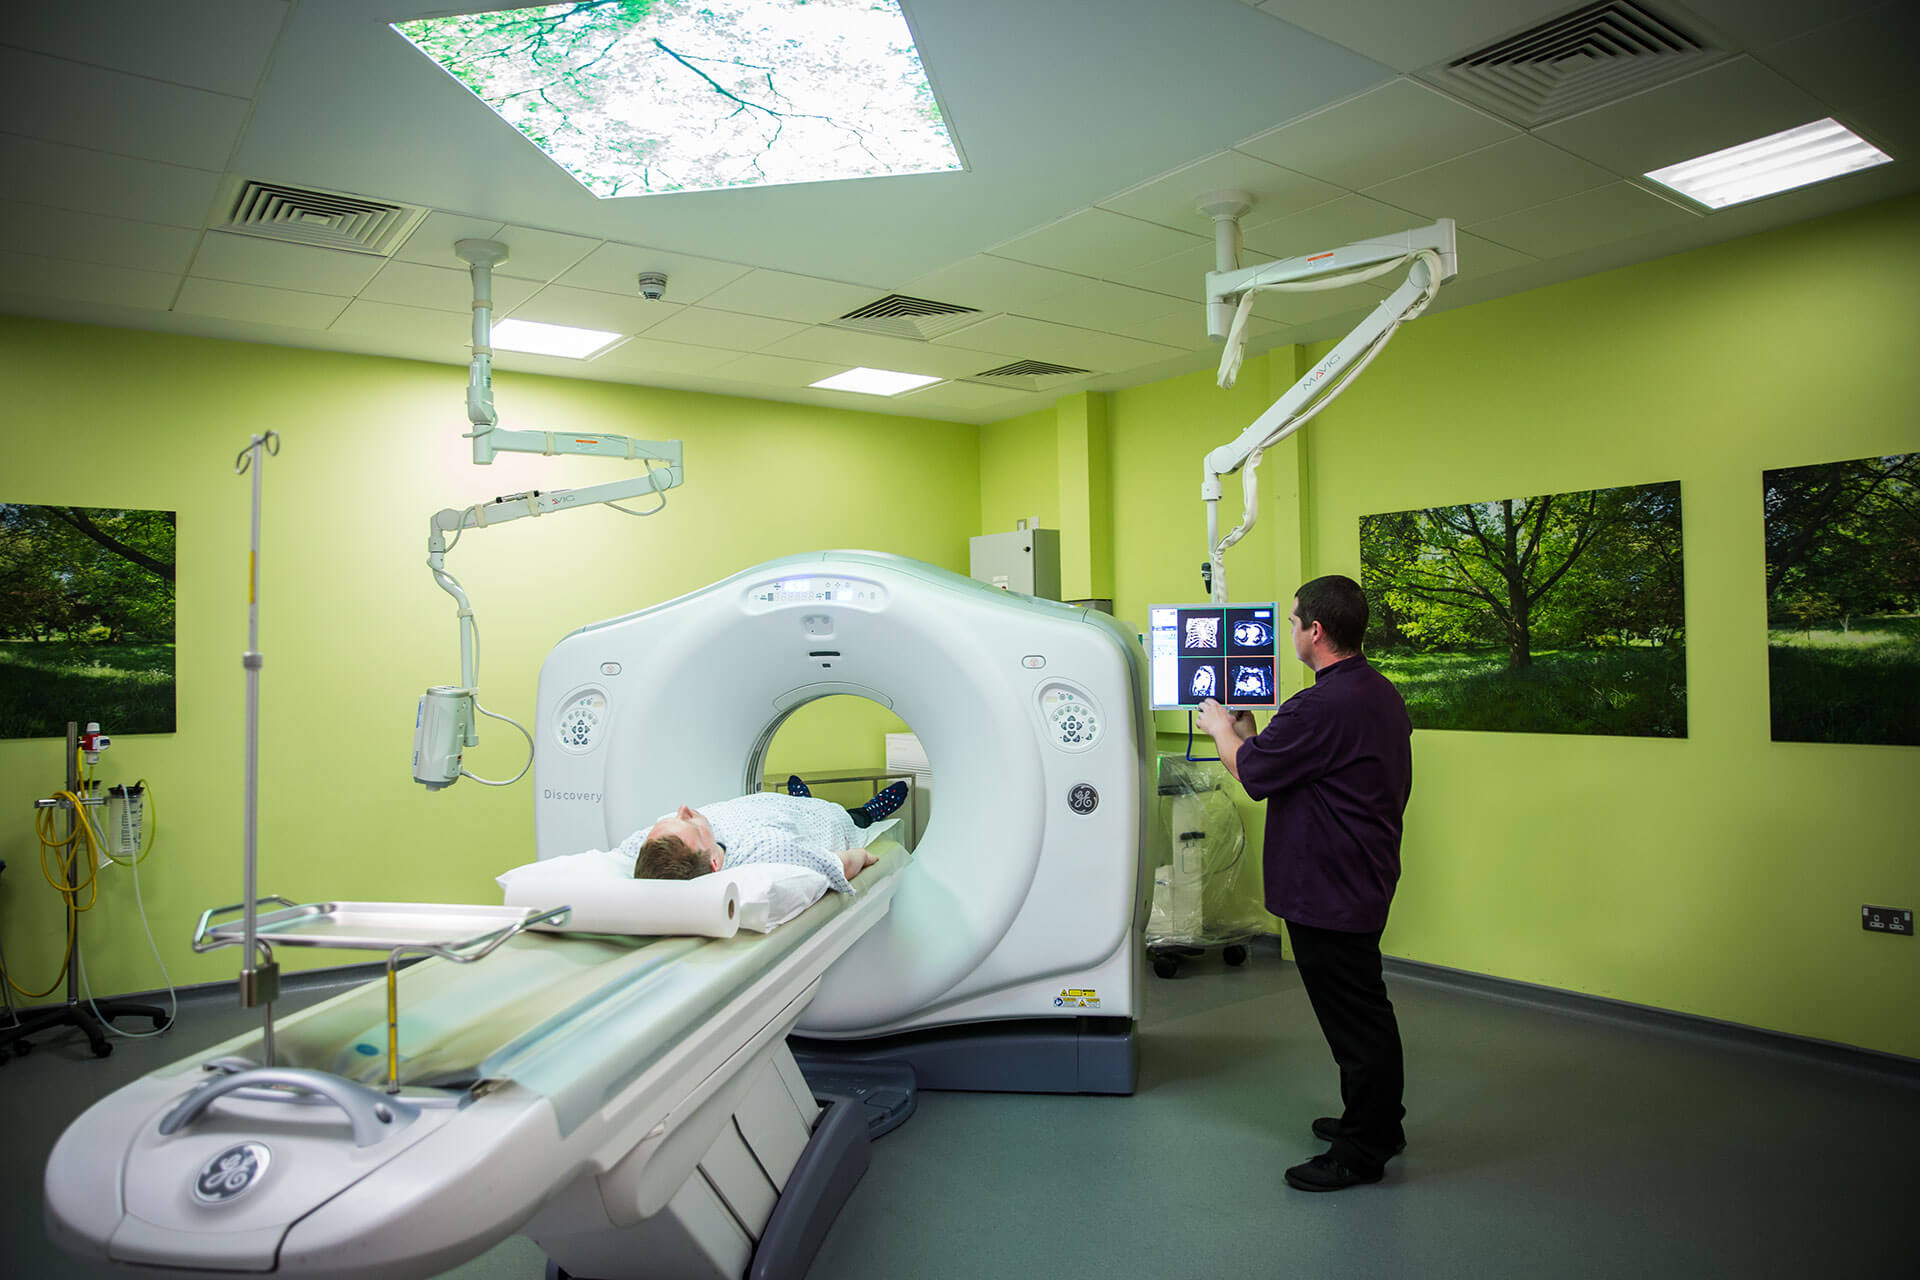 CT Scans & Imaging Private CAT Scans KIMS Hospital, Kent